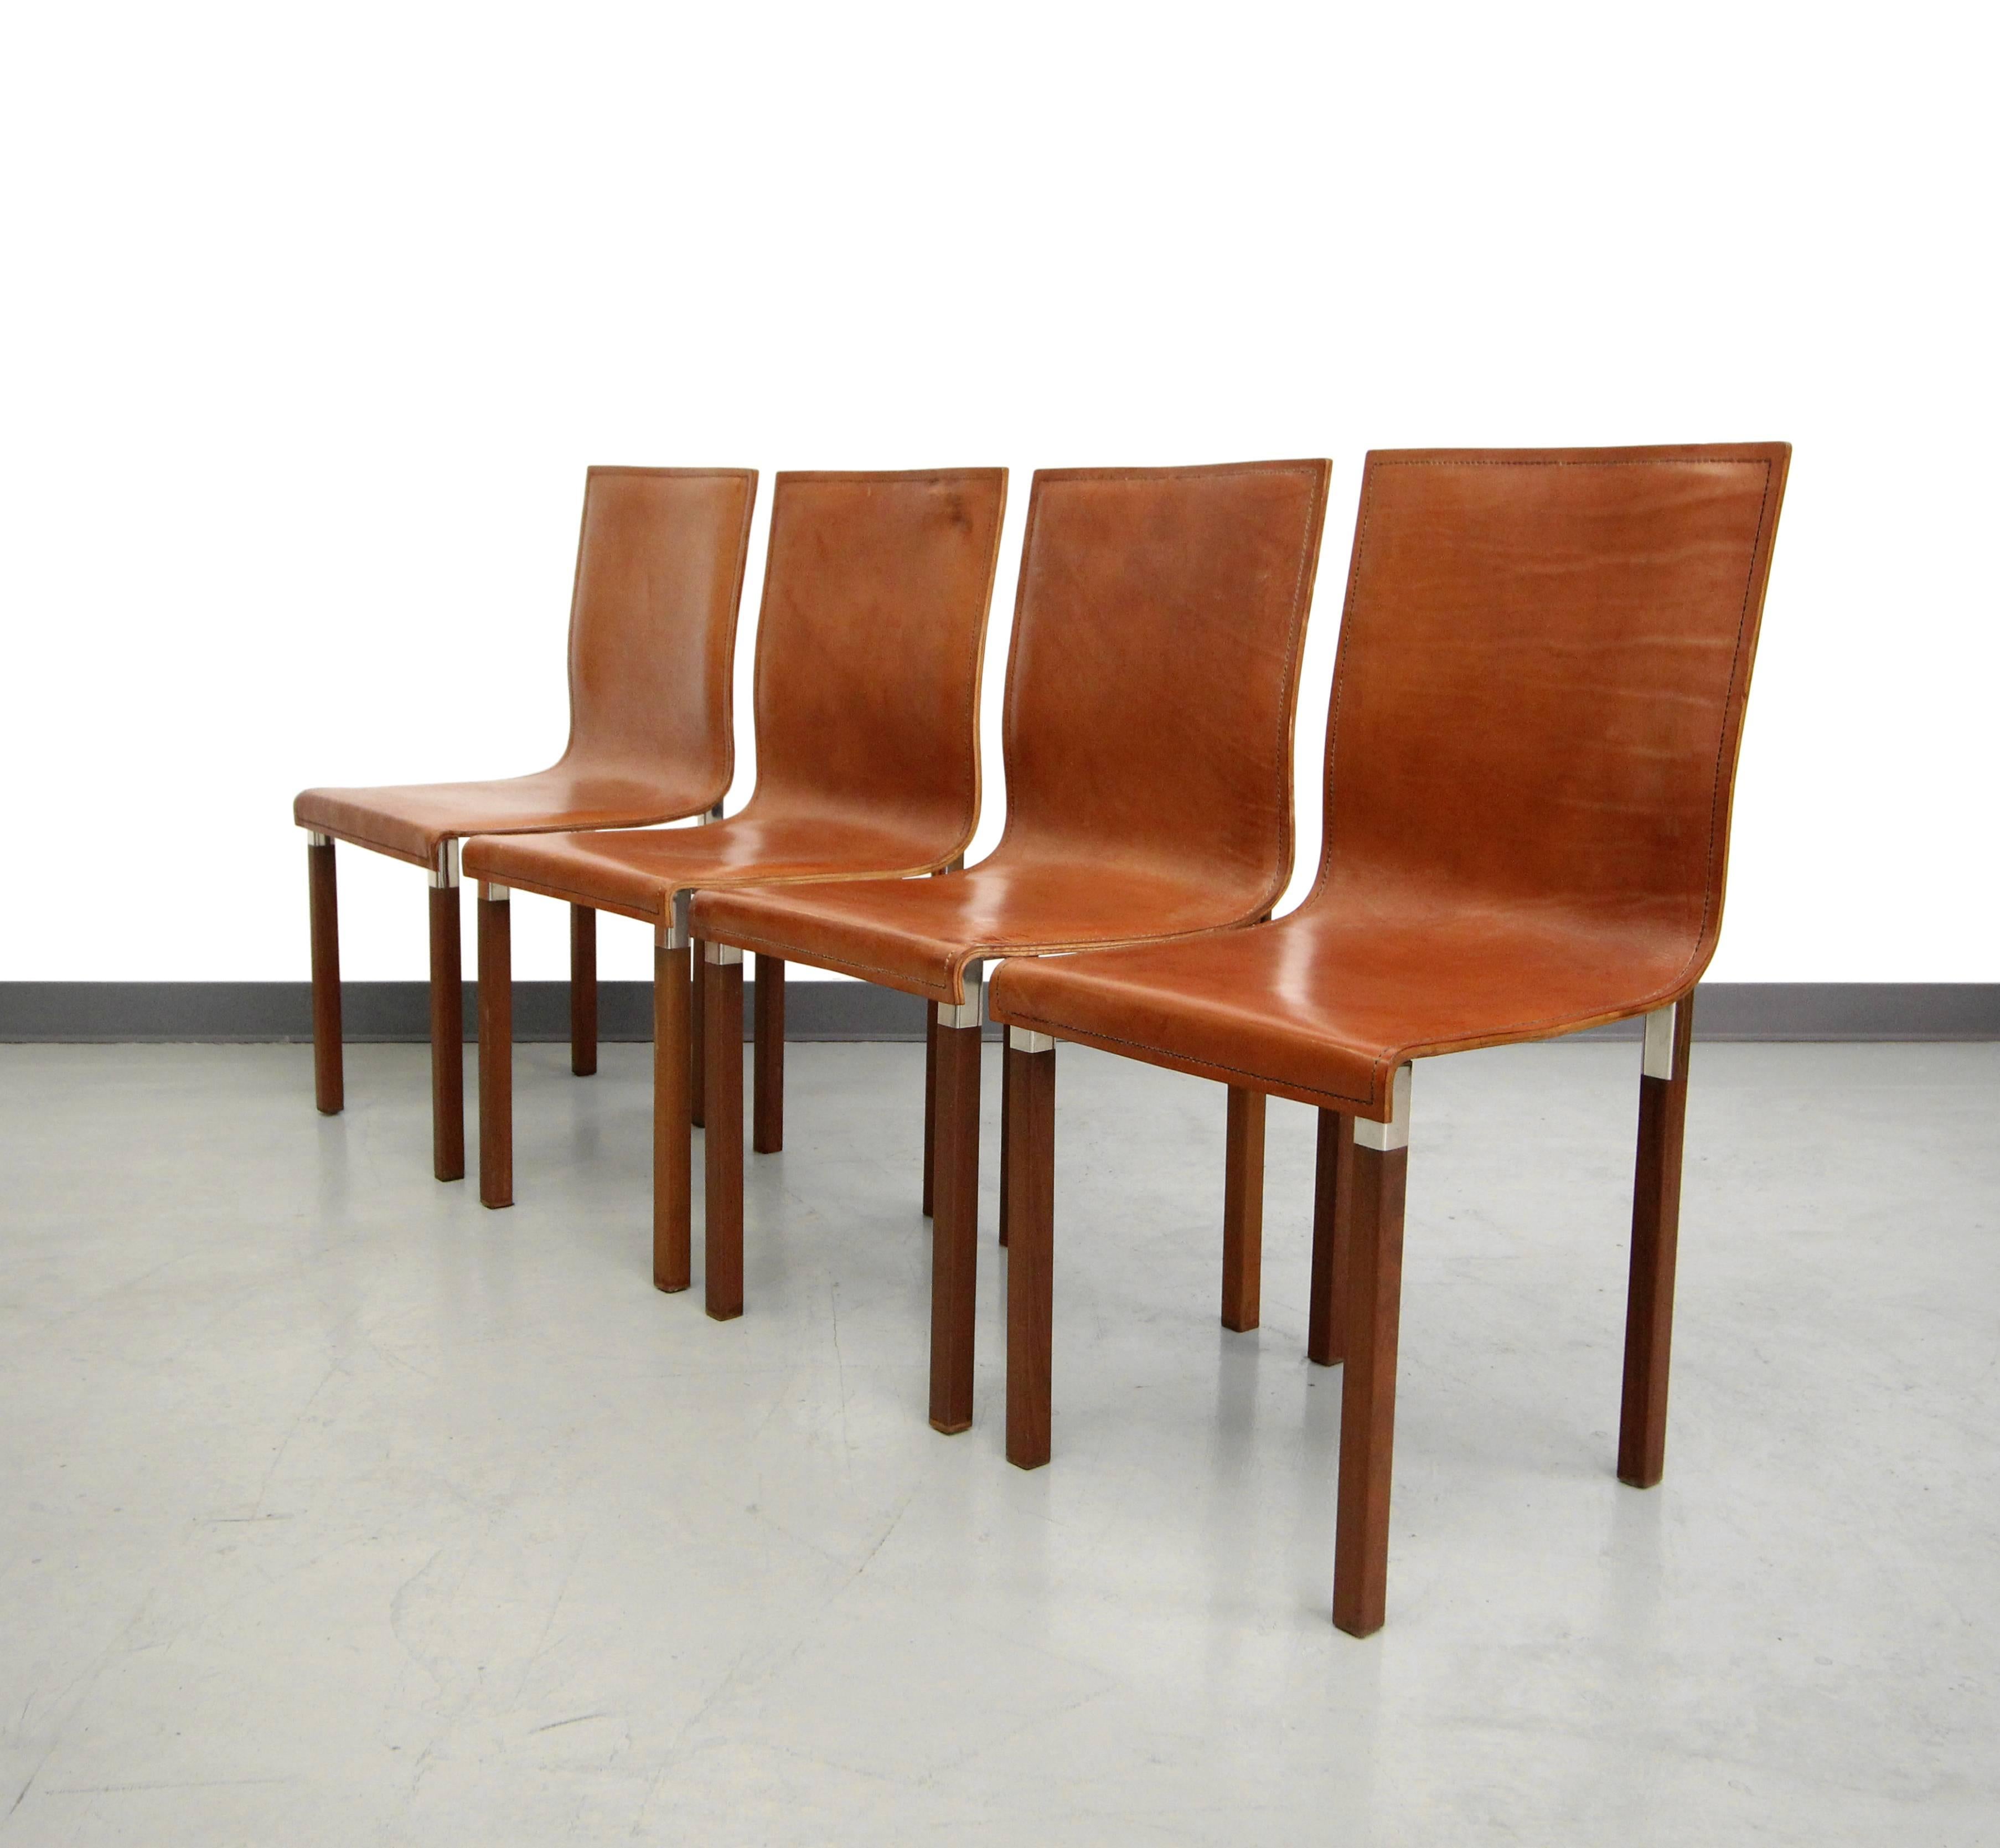 Gorgeous set of four Emile chairs by Zele Company. The Emile chairs were designed with details and materials to reflect the Art Deco period. They are constructed out of double panel hand-stitched saddle leather upon solid wood legs with polished